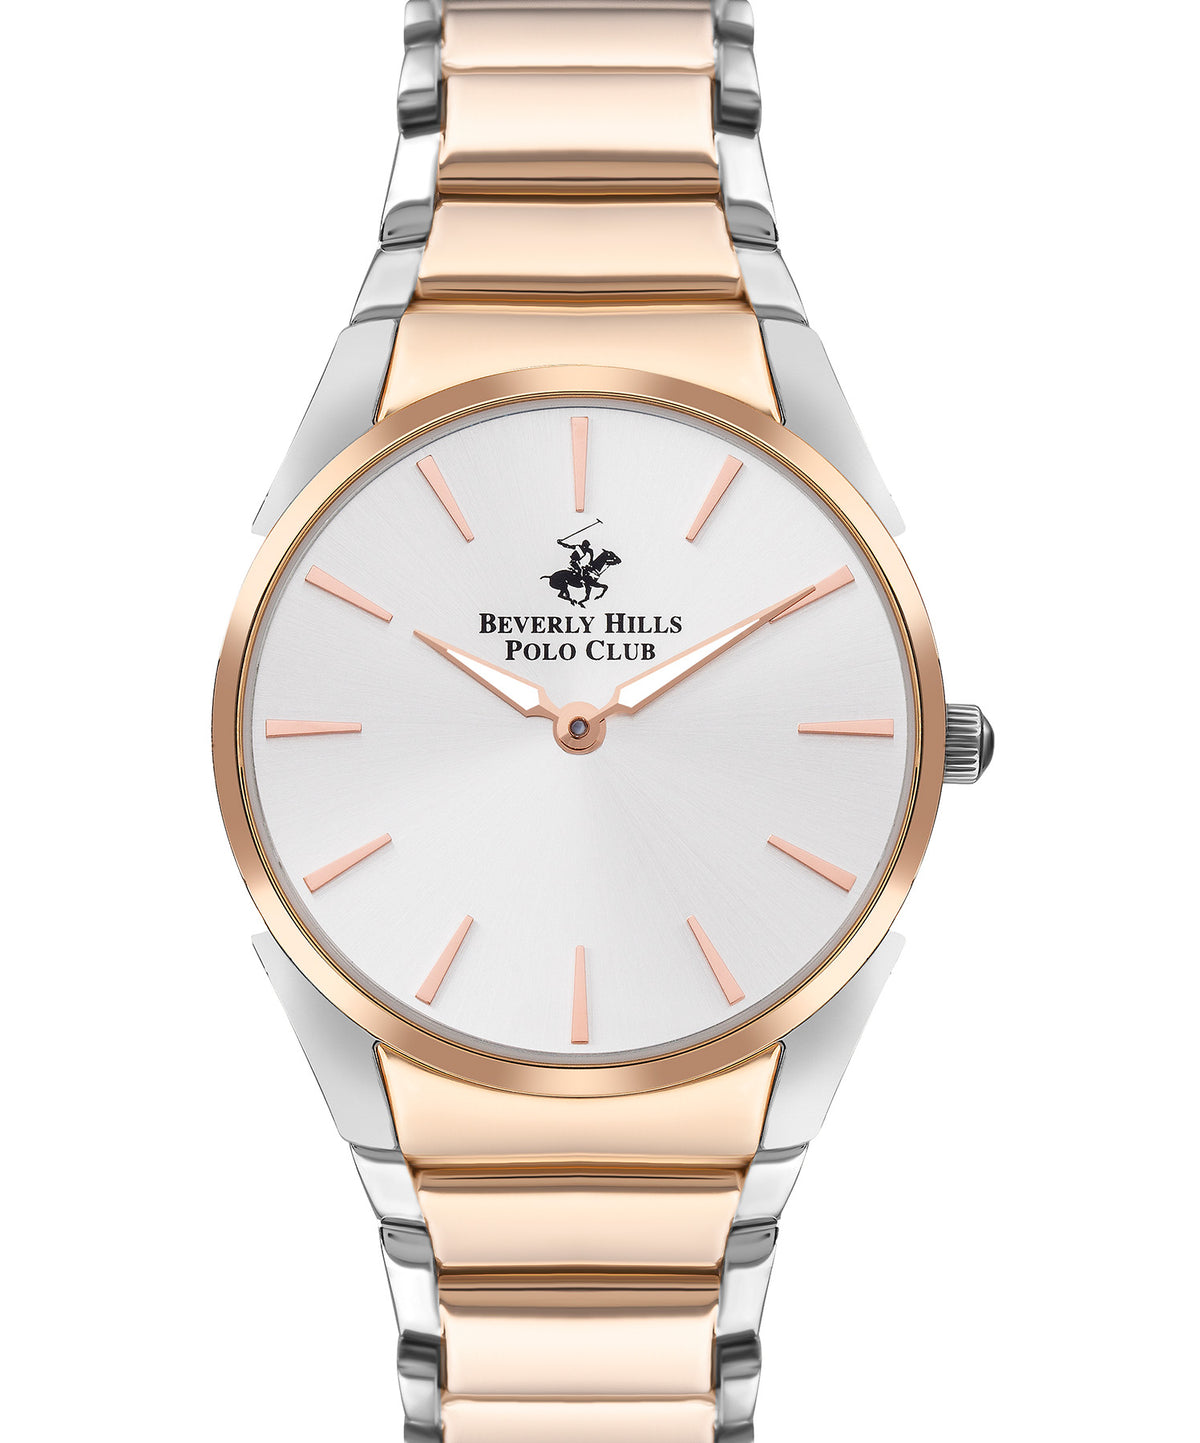 Beverly Hills Polo Club  Women's watch, Silver Dial,Two Tone Stainless Steel Metal Strap, Wrist Watch, BP3384C.530